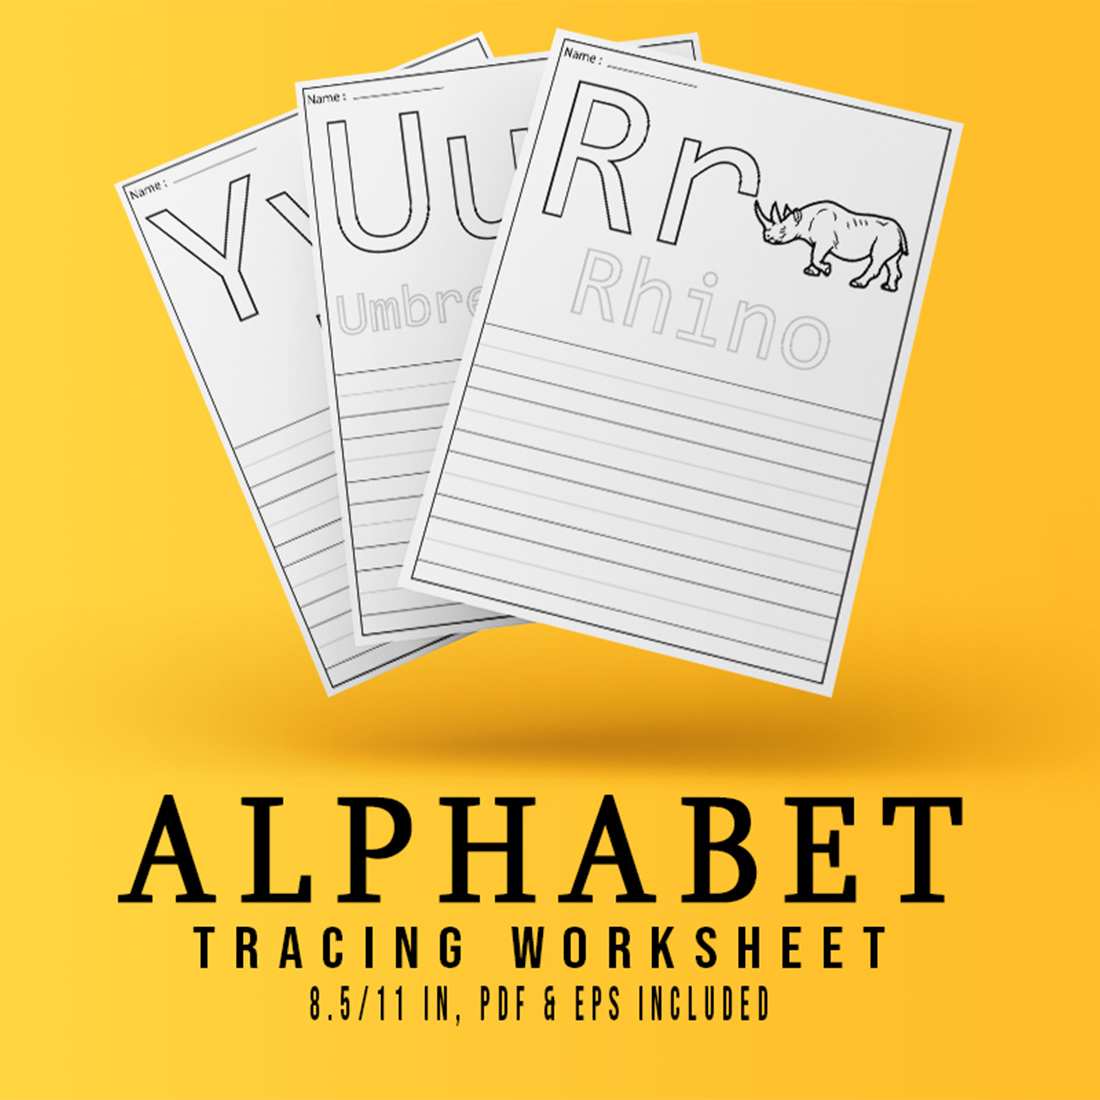 A to Z Alphabets Words Tracing Worksheets Coloring Page Bundle V.2 cover image.